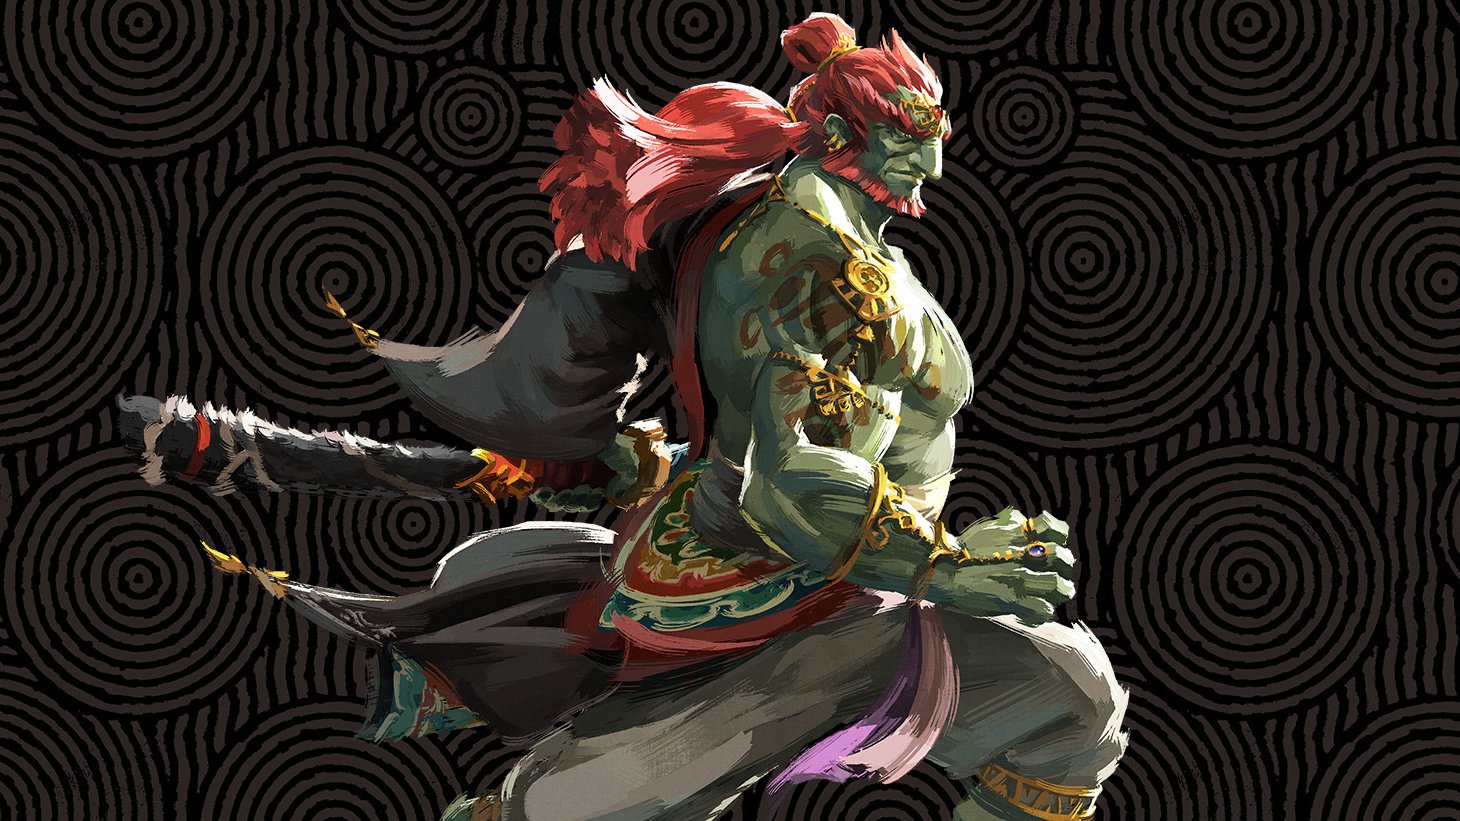 Tears of the Kingdom Voice Actors: Ganondorf can be seen